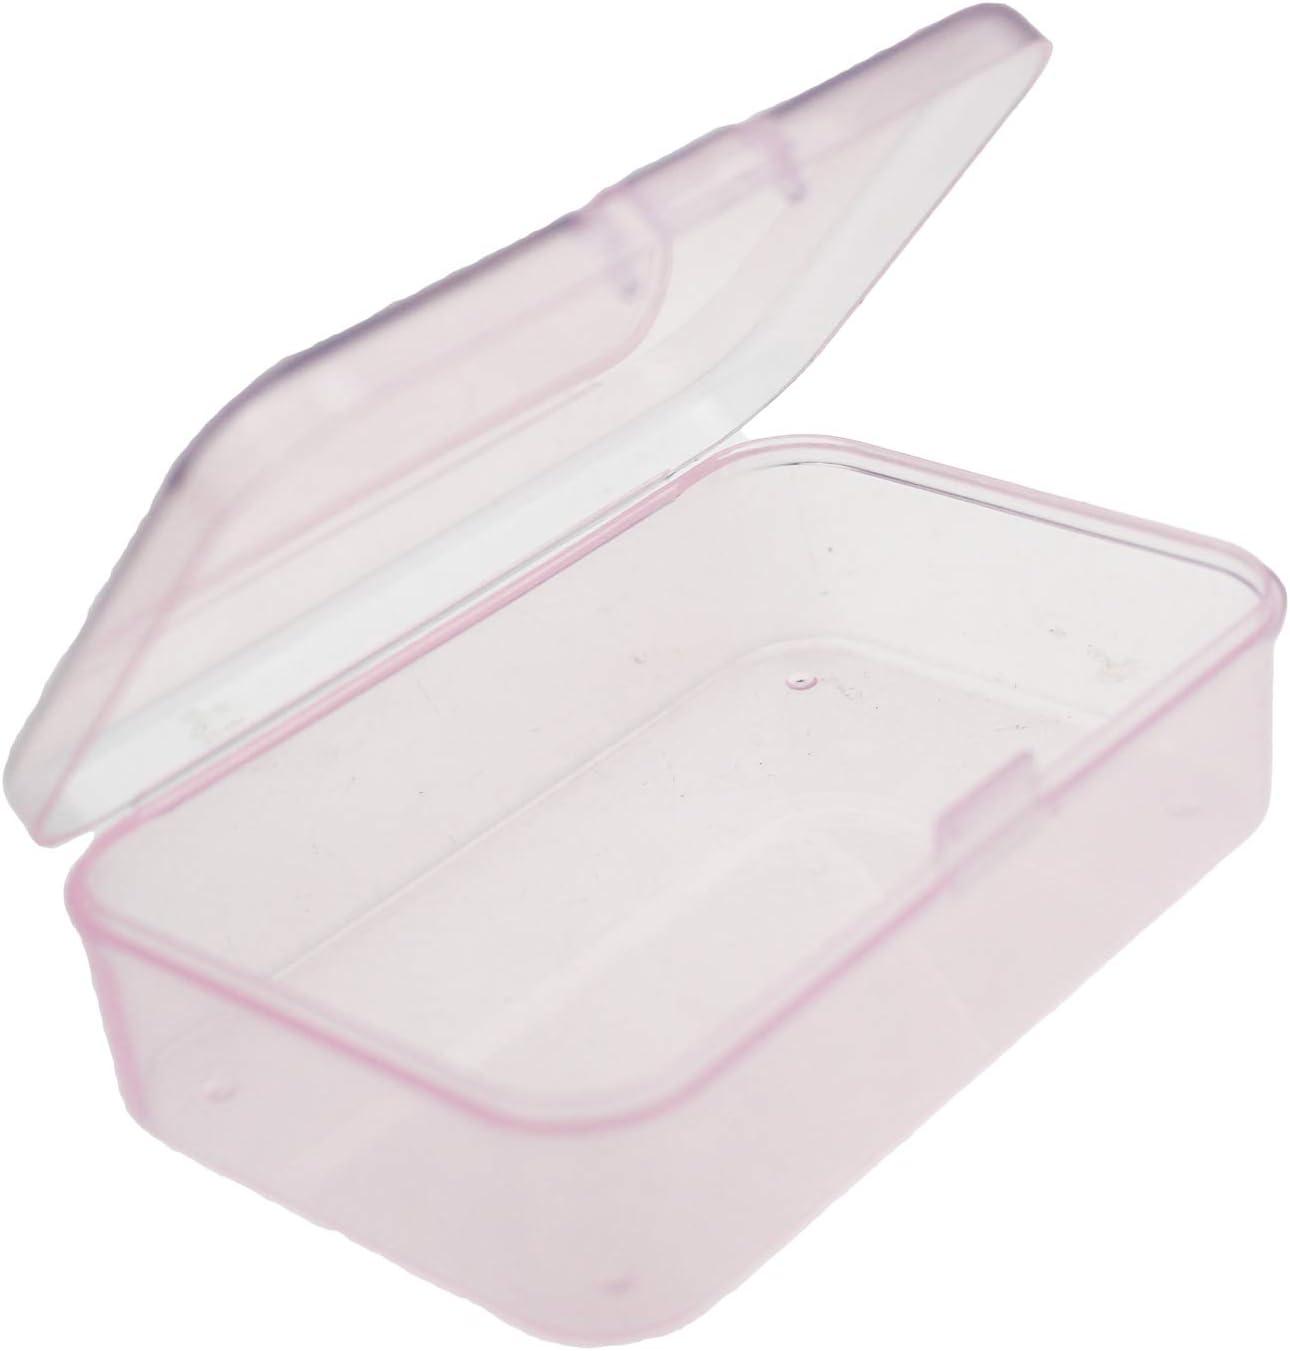  Goodma 12 Pieces Square Empty Mini Clear Plastic Organizer  Storage Box Containers with Hinged Lids for Small Items and Other Craft  Projects (3.35 x 3.35 x 1.38 inch) : Arts, Crafts & Sewing